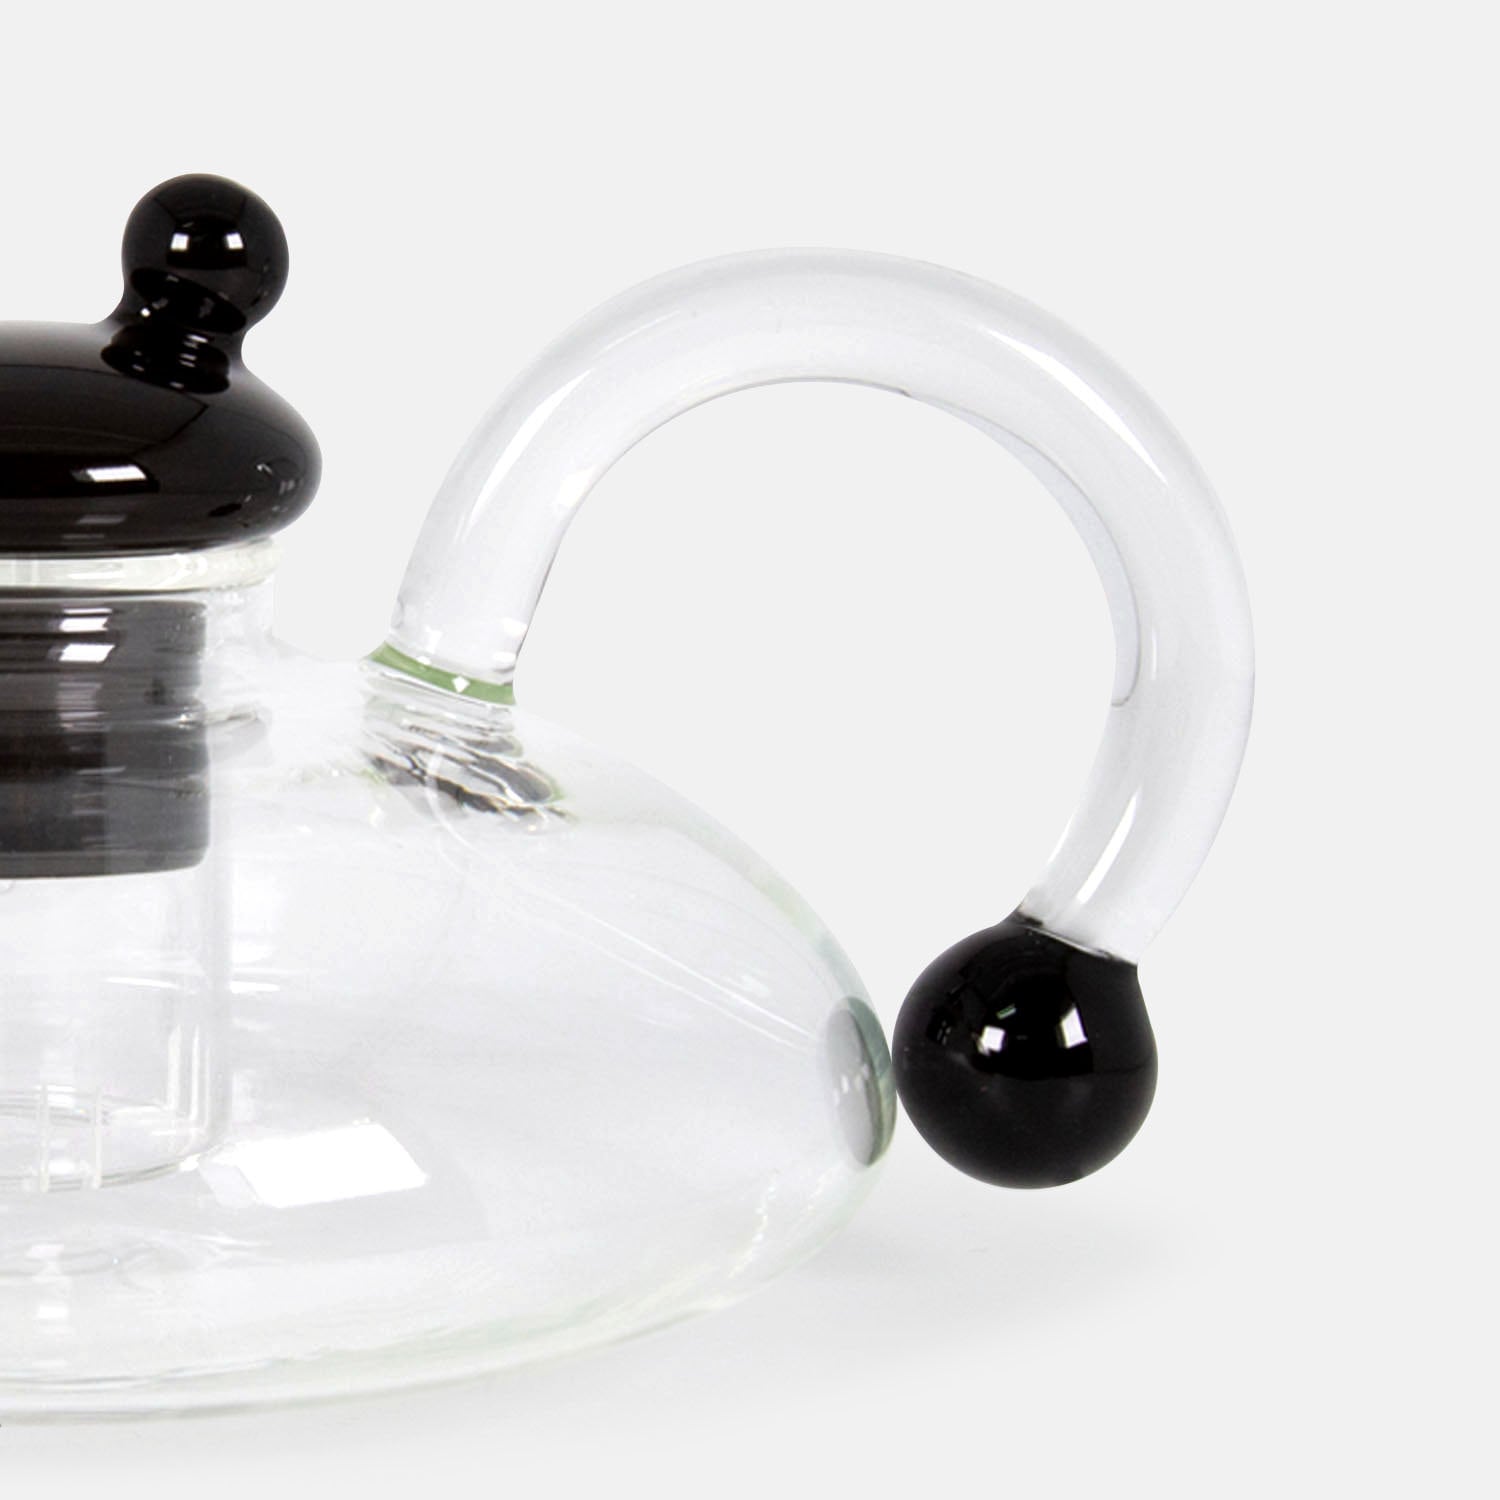 Charm Round Knob Glass Teapot with Infuser